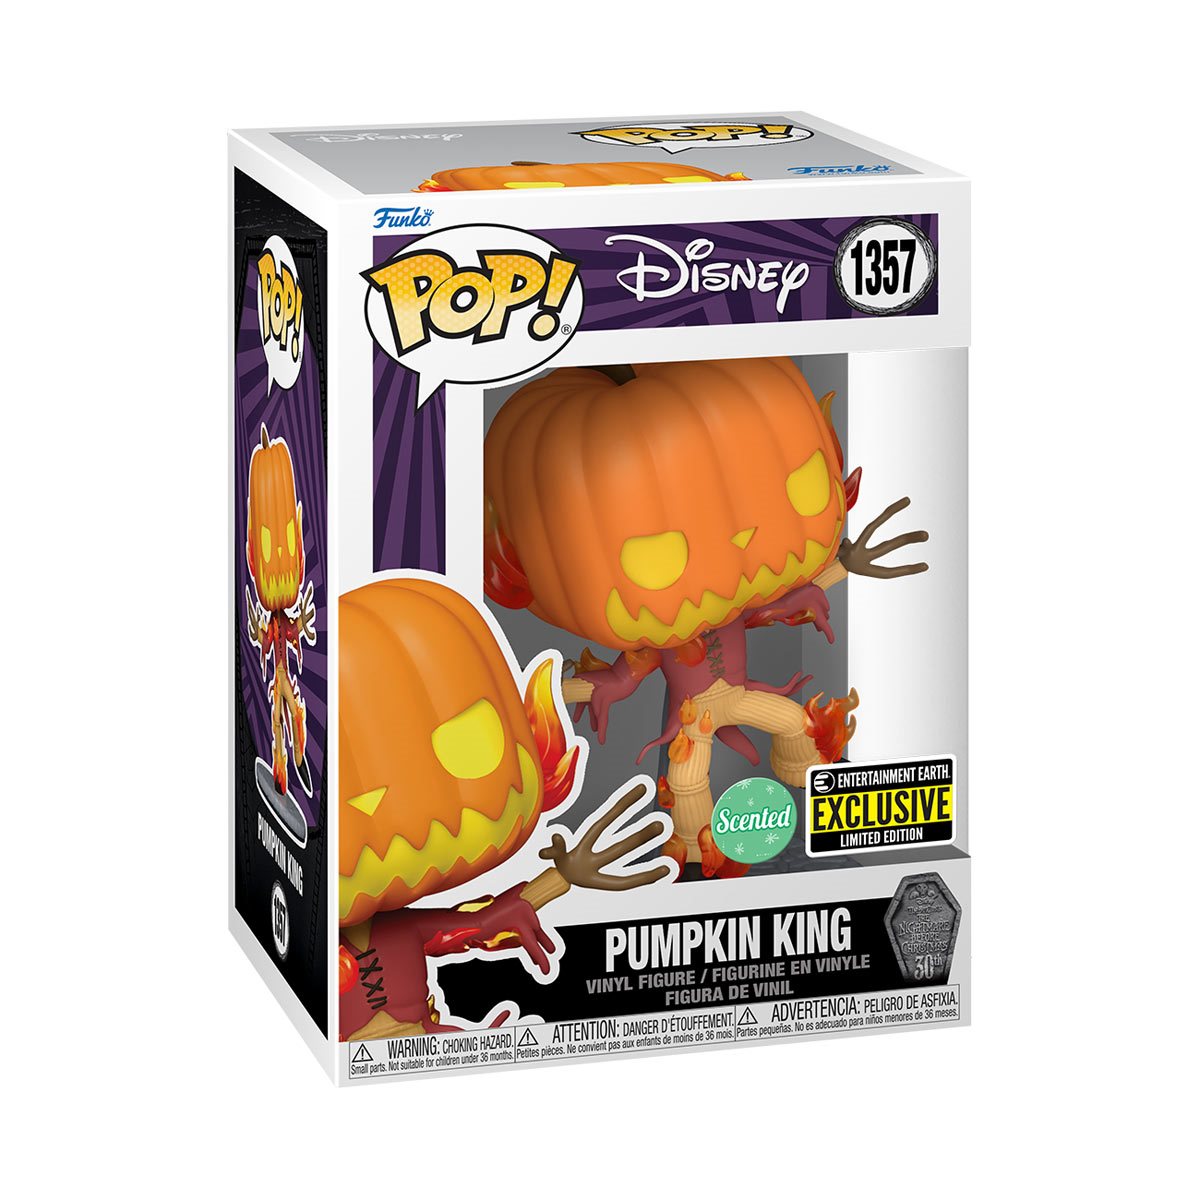 Pumpkin King’s Night Out